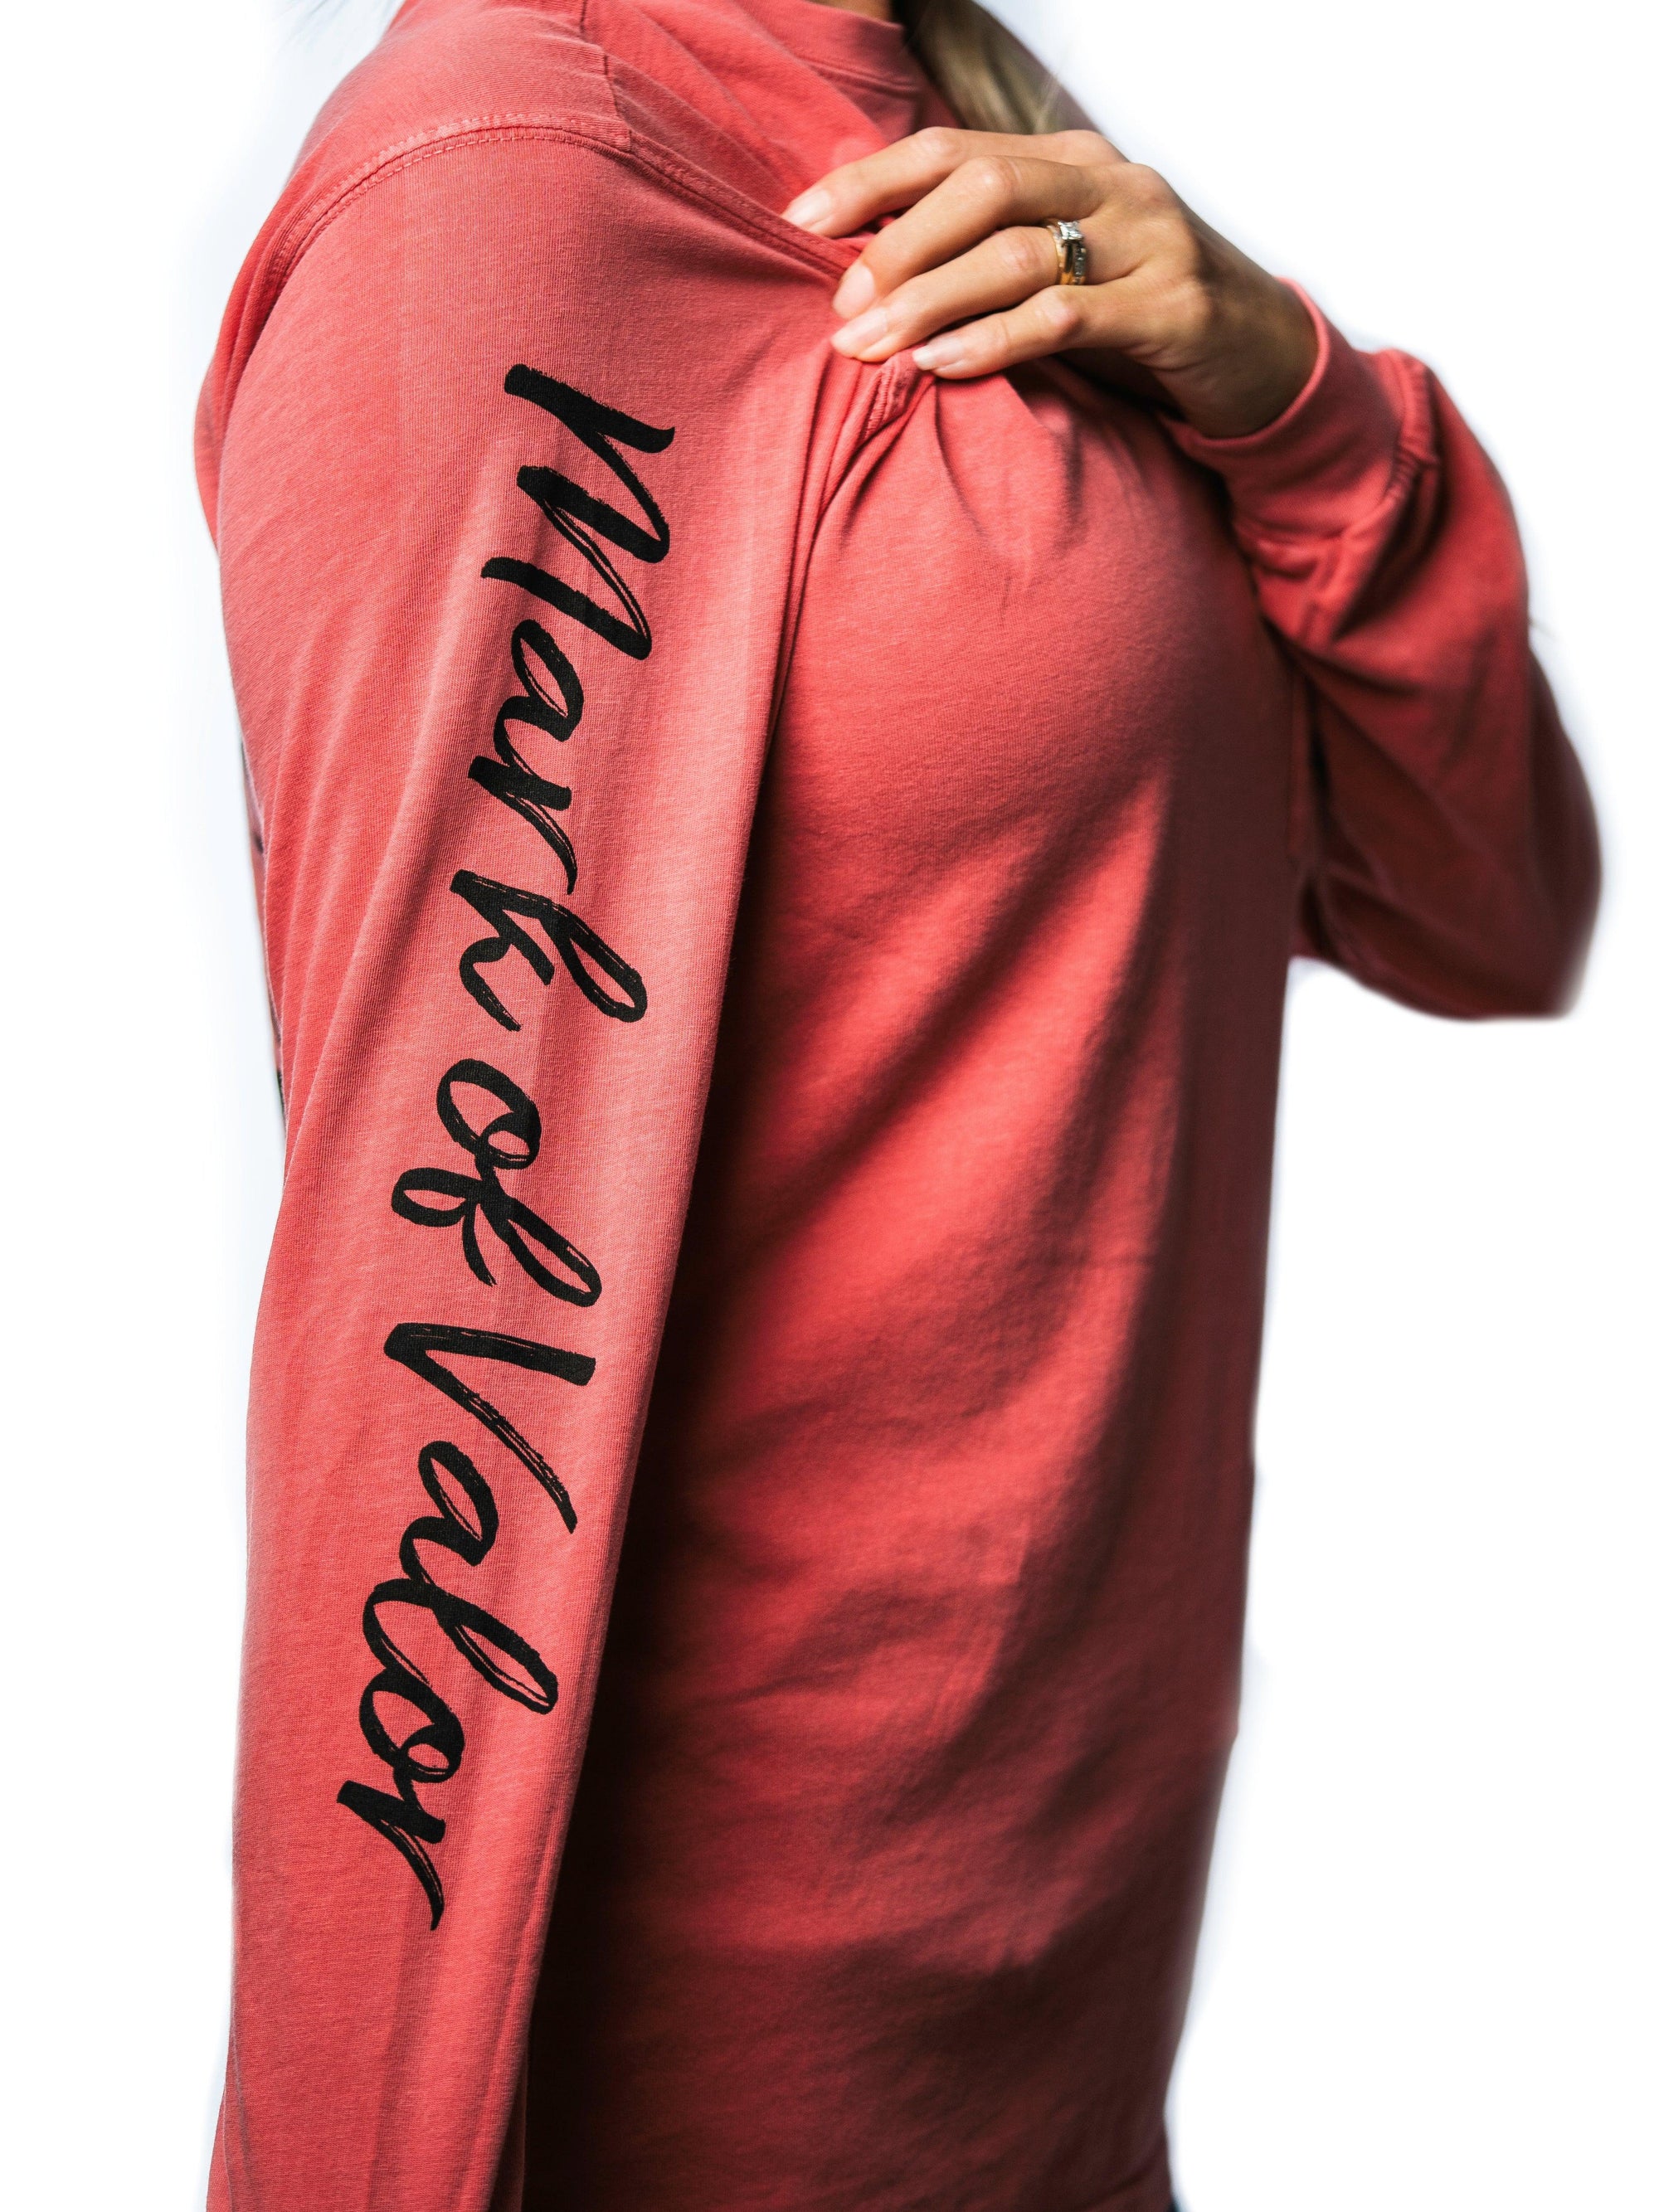 Side view of a woman wearing a pink long-sleeve shirt that has the words “Mark of Valor” printed on the right sleeve